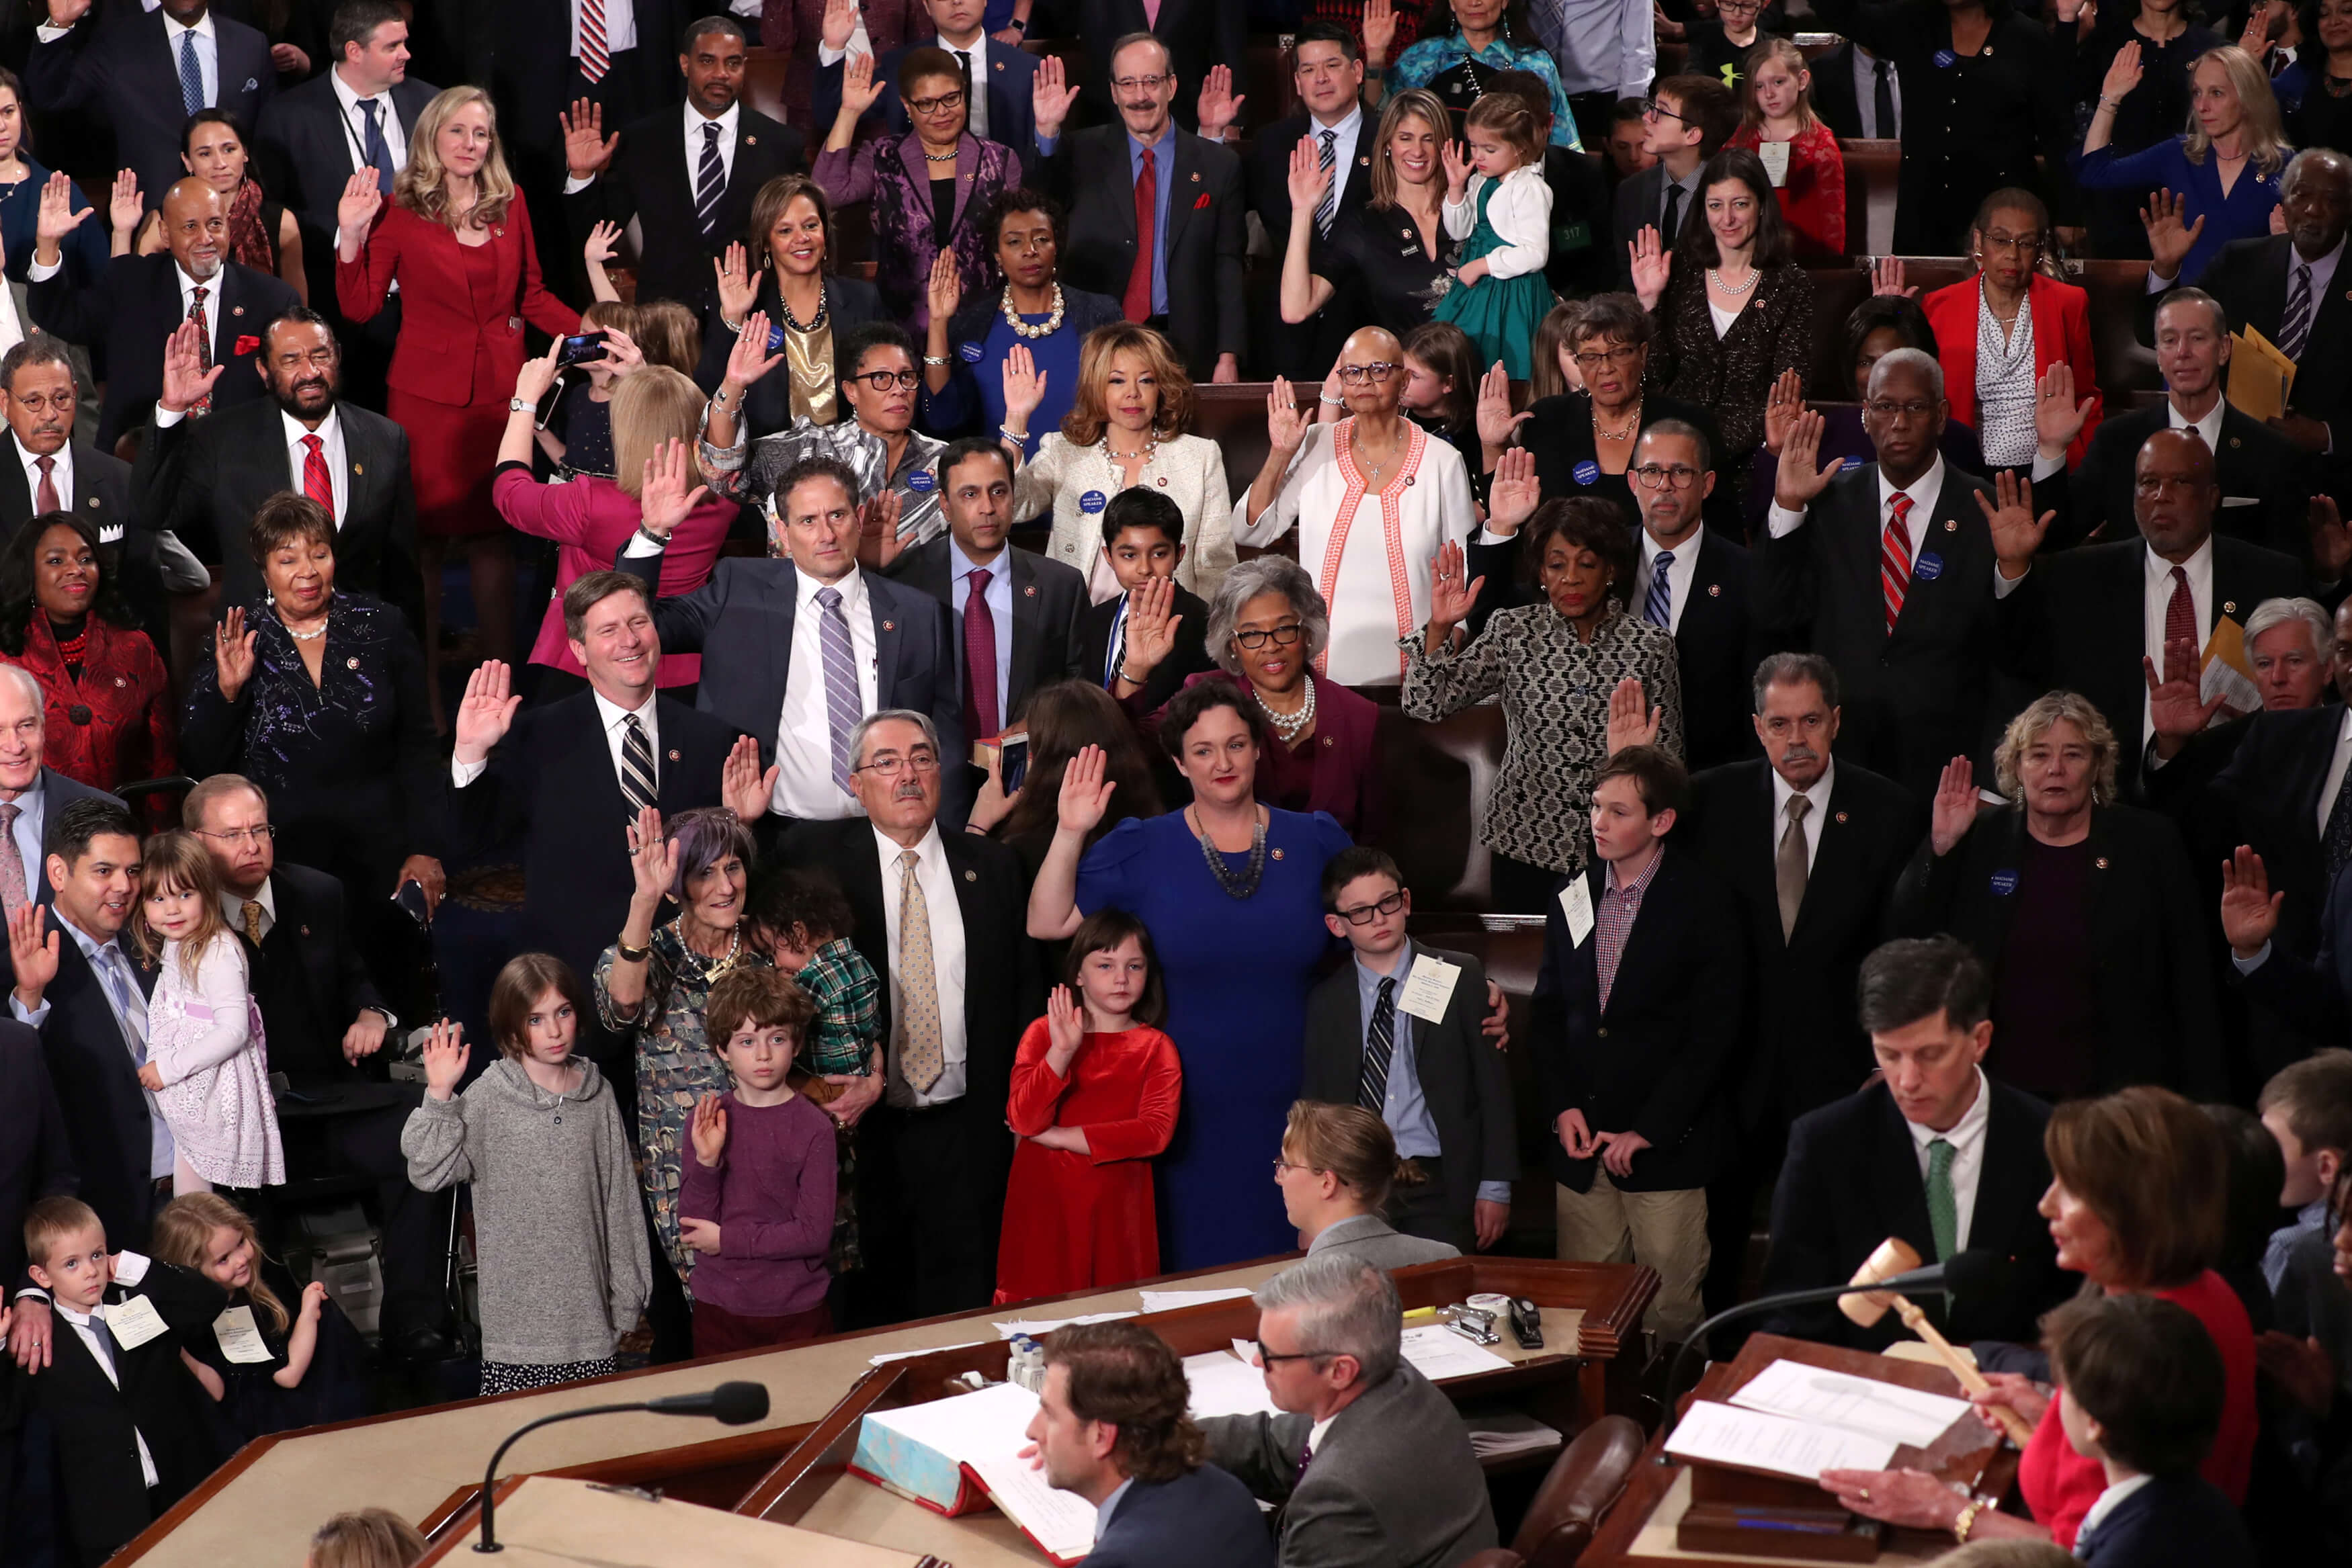 Pelosi Regains Gavel as Speaker of Most Diverse U.S. House Ever | Sojourners